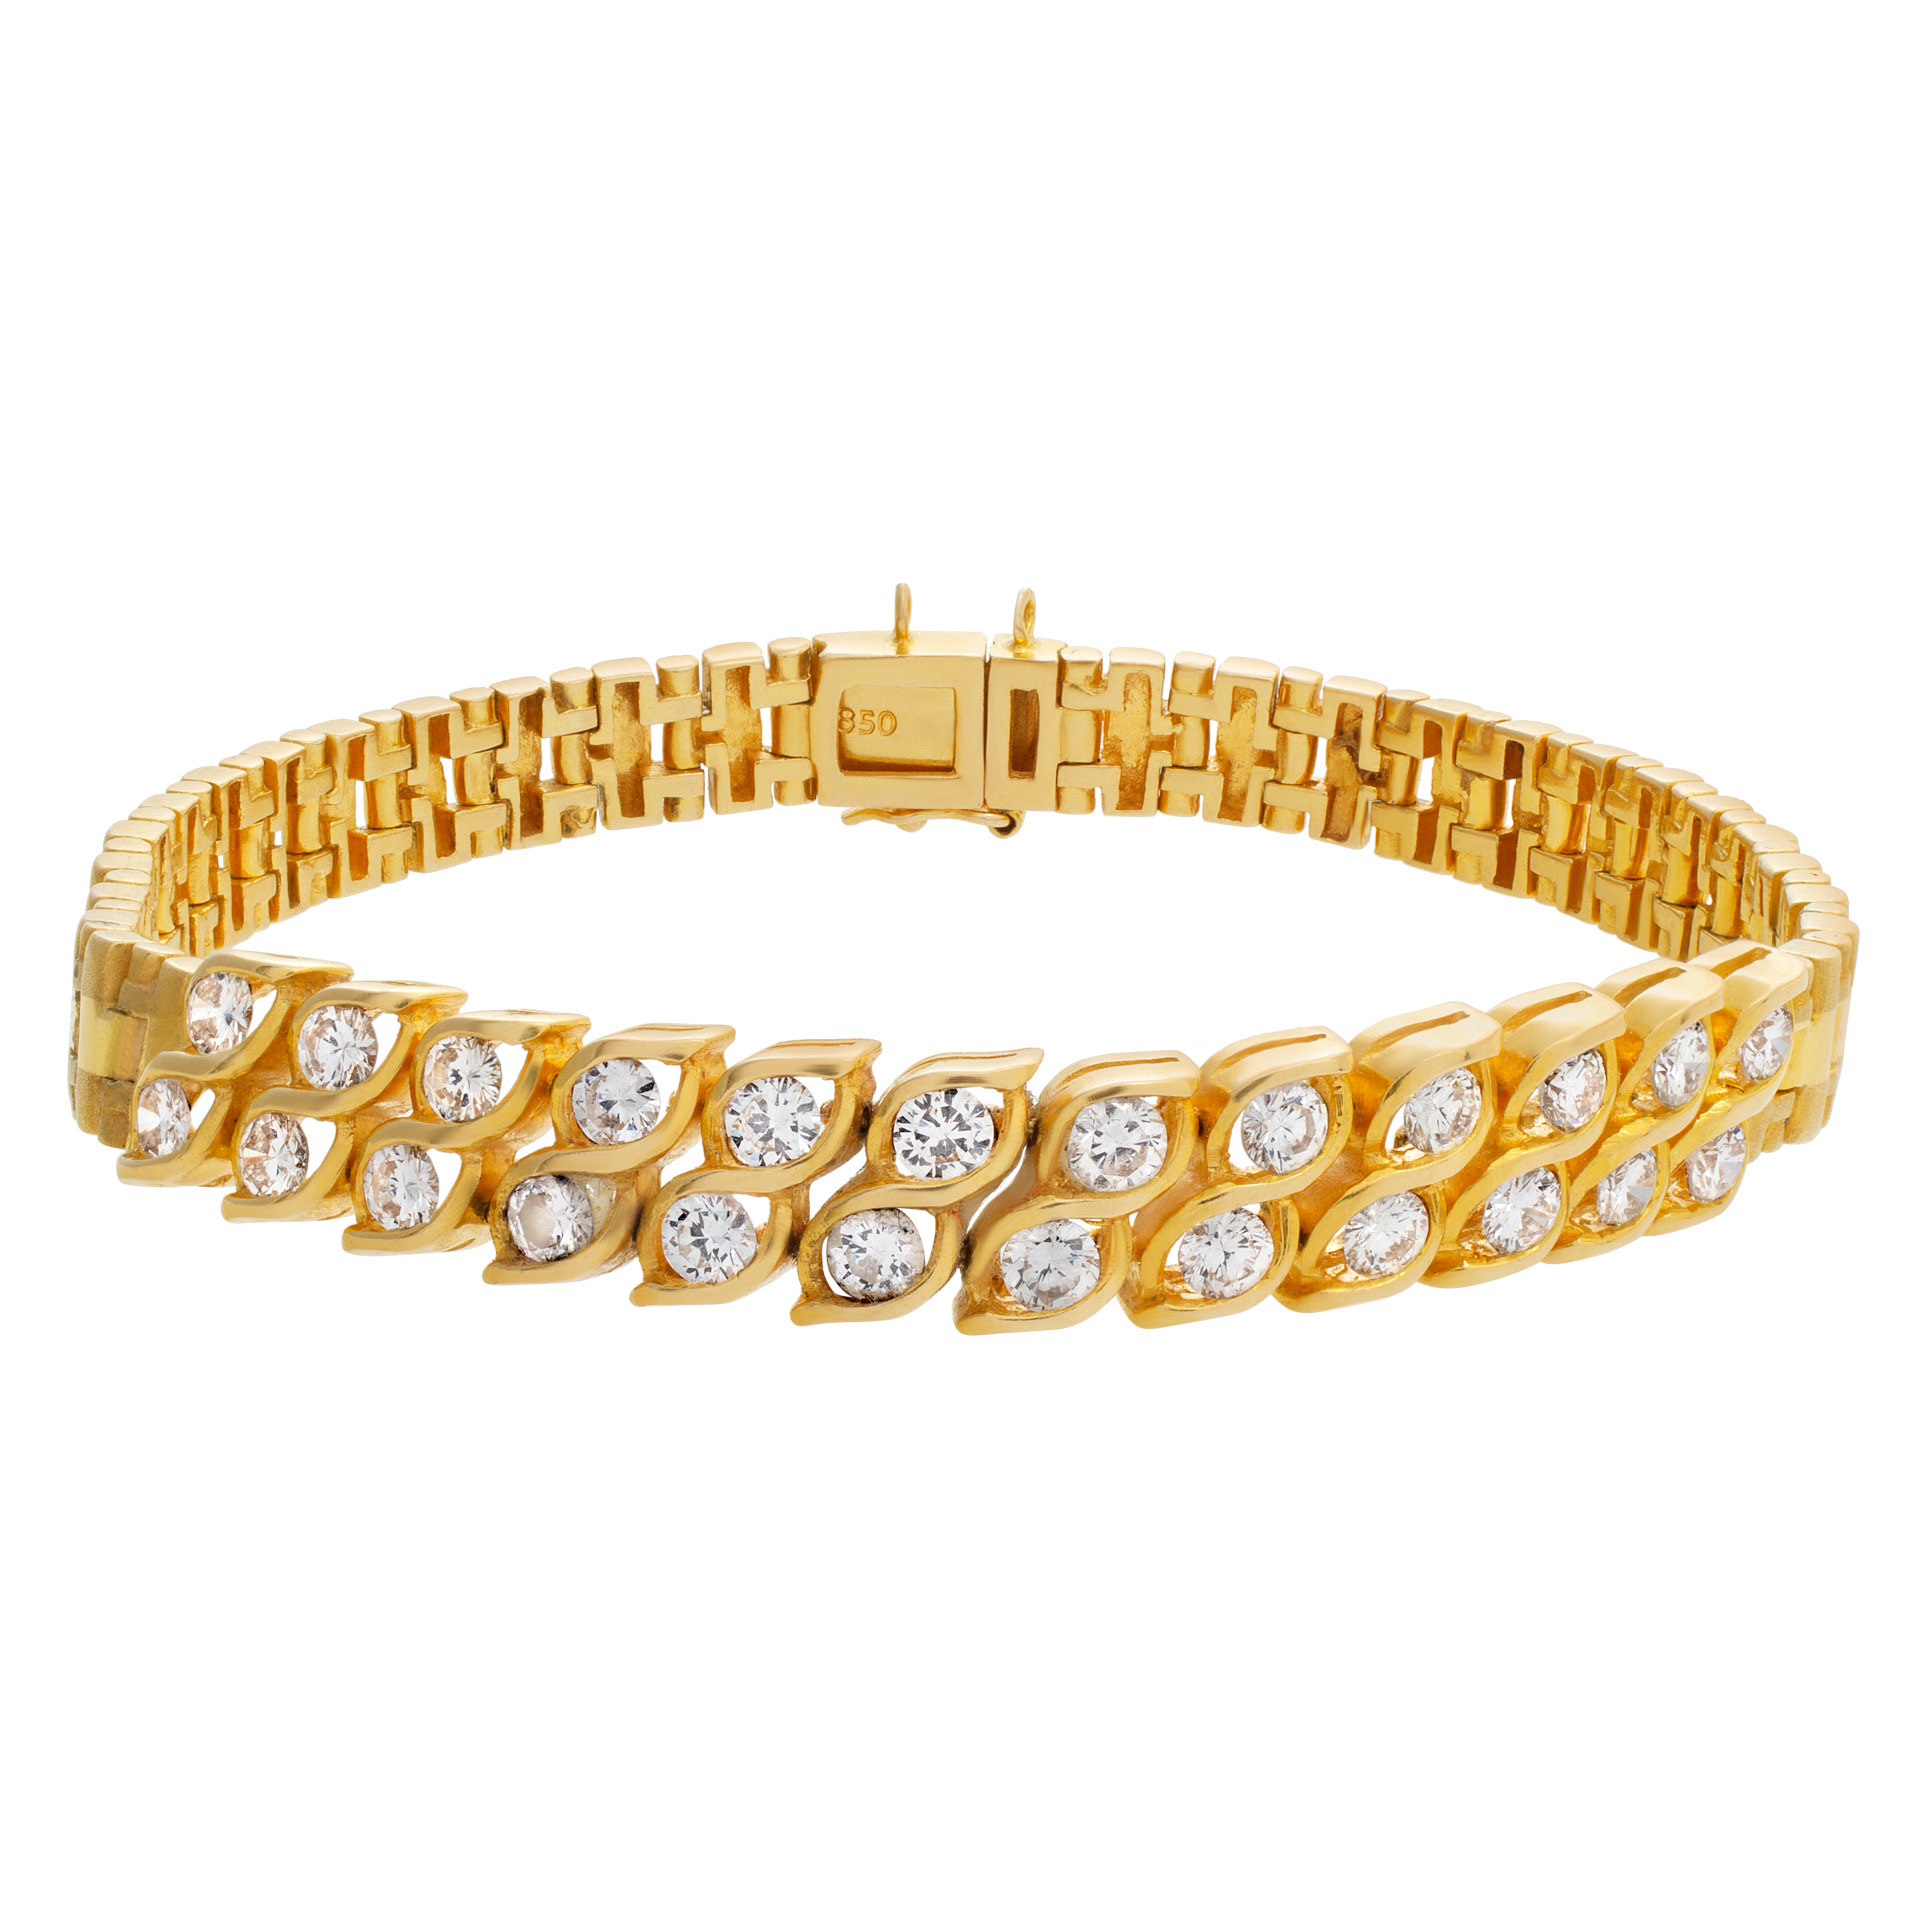 Diamond bracelet in 18k yellow gold with over 1.25 carats in G-H color, VS clarity diamonds image 1